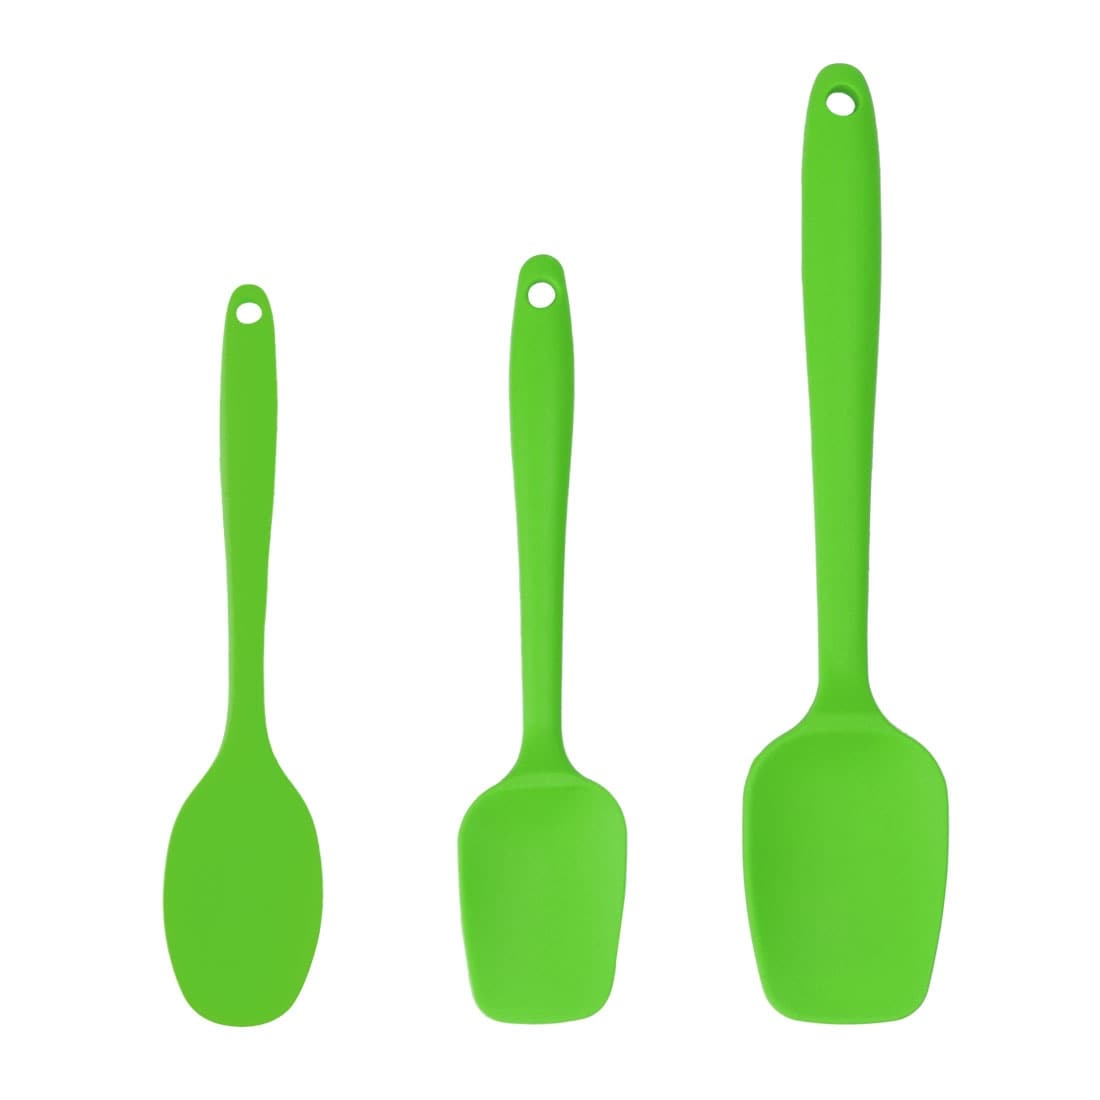 https://ak1.ostkcdn.com/images/products/is/images/direct/3e138423b1335d8dc85255a217448c4e9c83d5a2/Silicone-Spatula-Set-3-Pcs-Heat-Resistant-Kitchen-Rubber-Scraper-Non-Stick-Spatula-for-Cooking-Baking-and-Mixing-Green.jpg